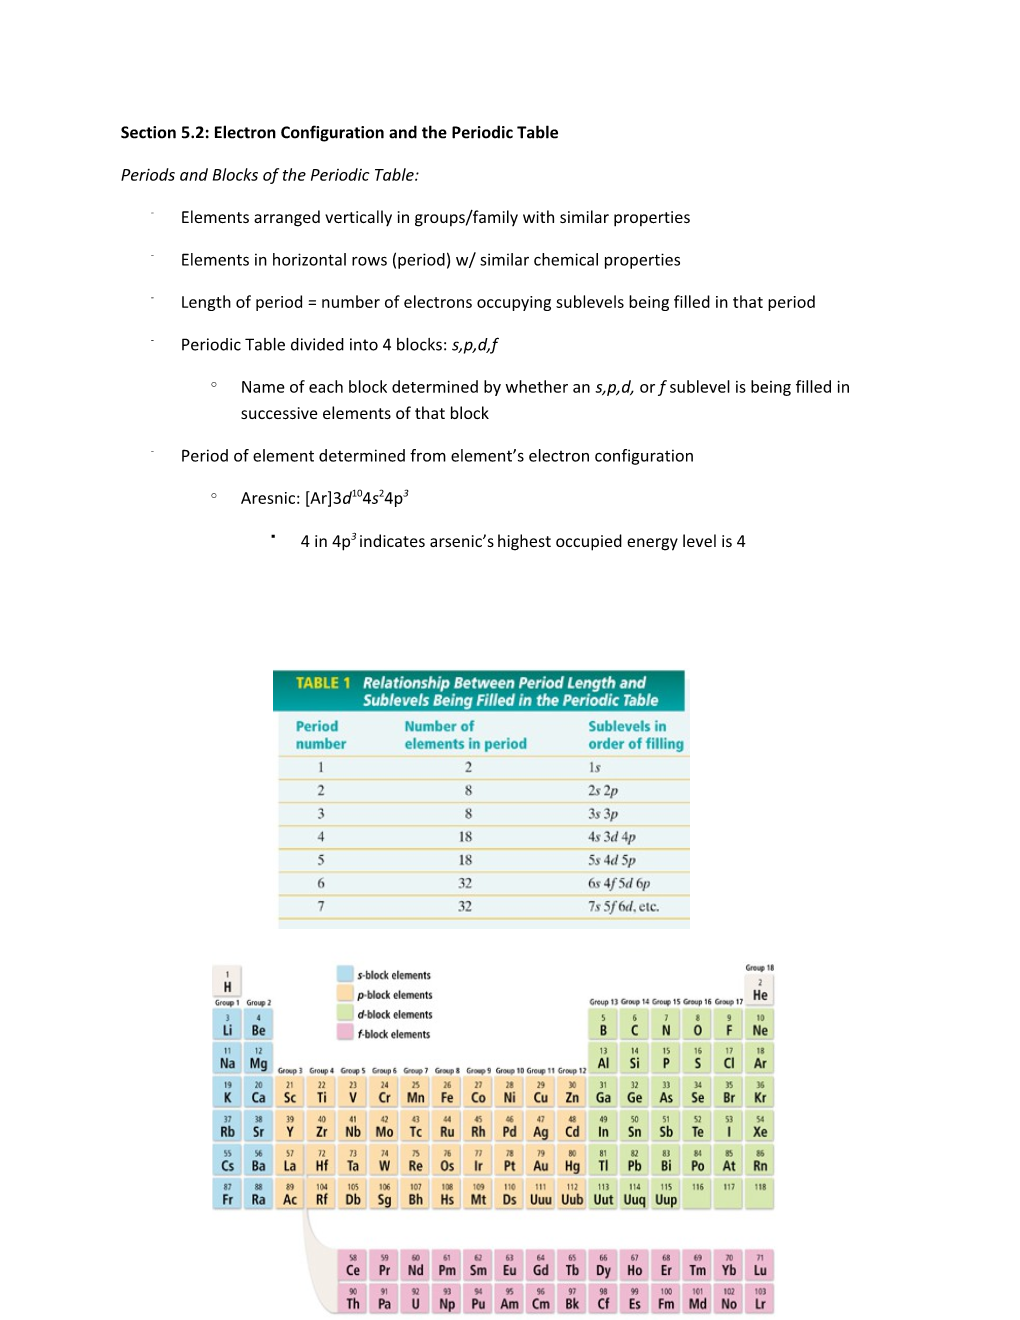 Section 5.2: Electron Configuration and the Periodic Table